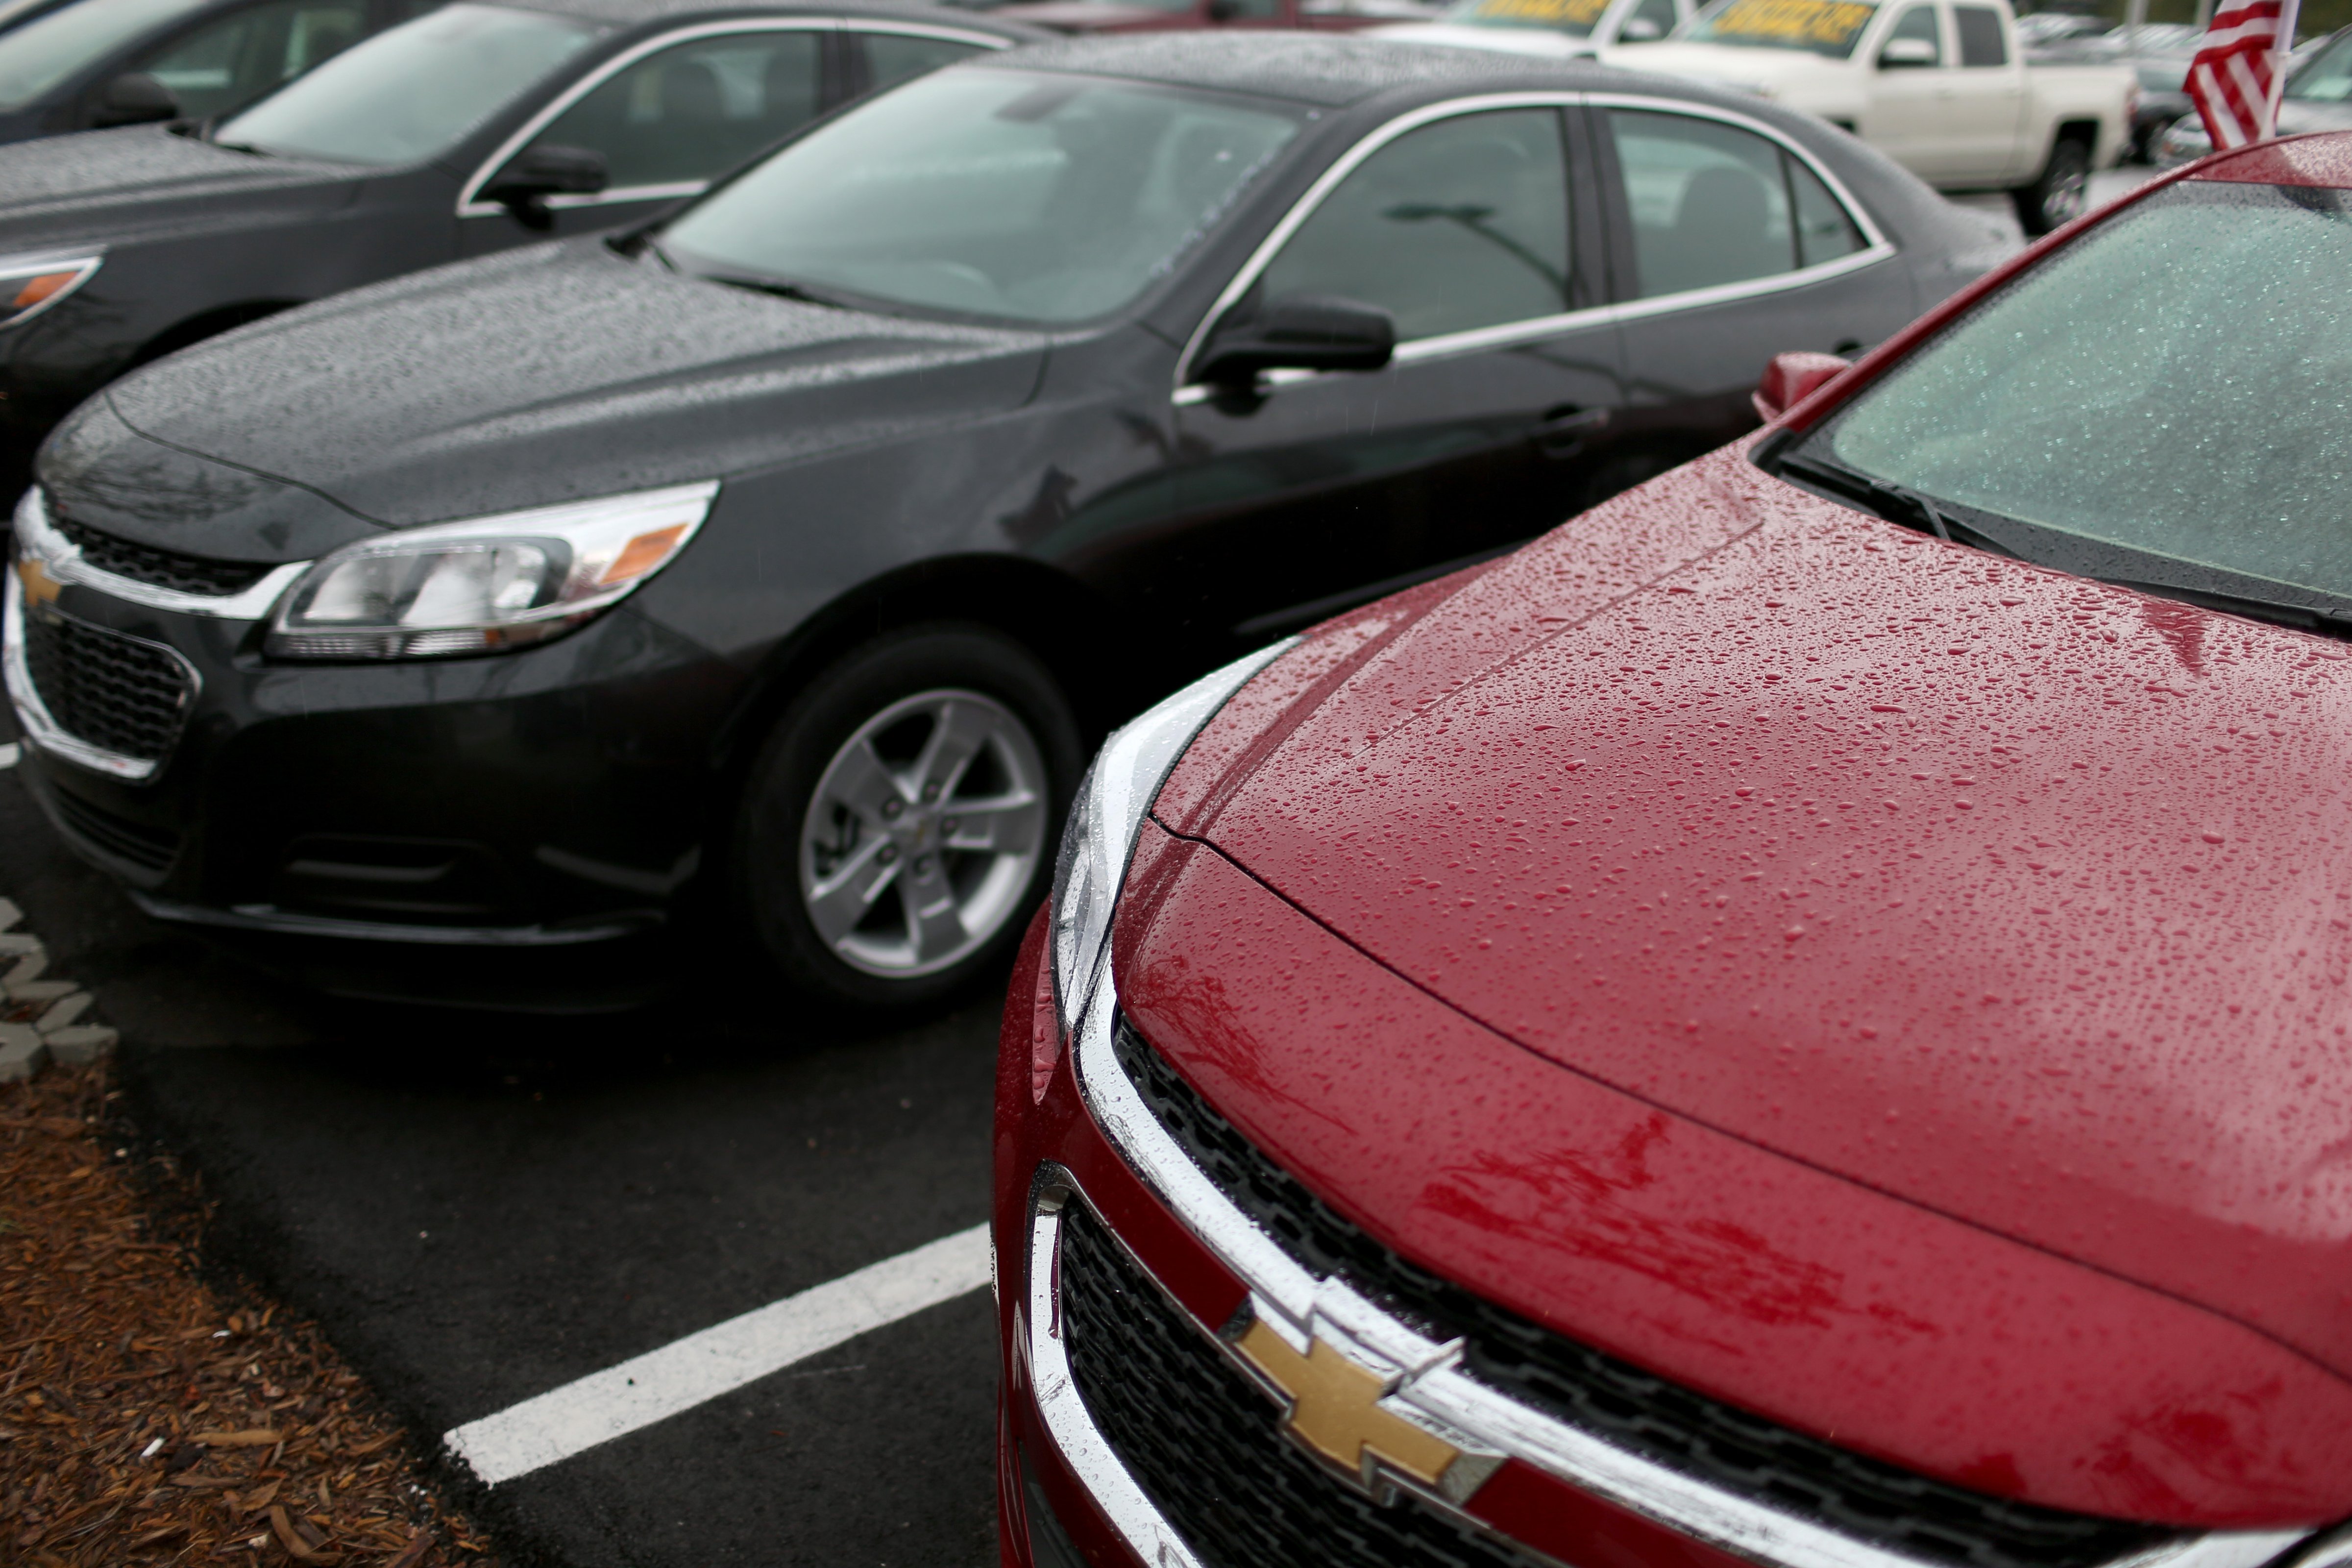 General Motors Chevrolet vehicles are seen on a sales lot on June 30, 2014 in Miami, Florida. (Joe Raedle—Getty Images)